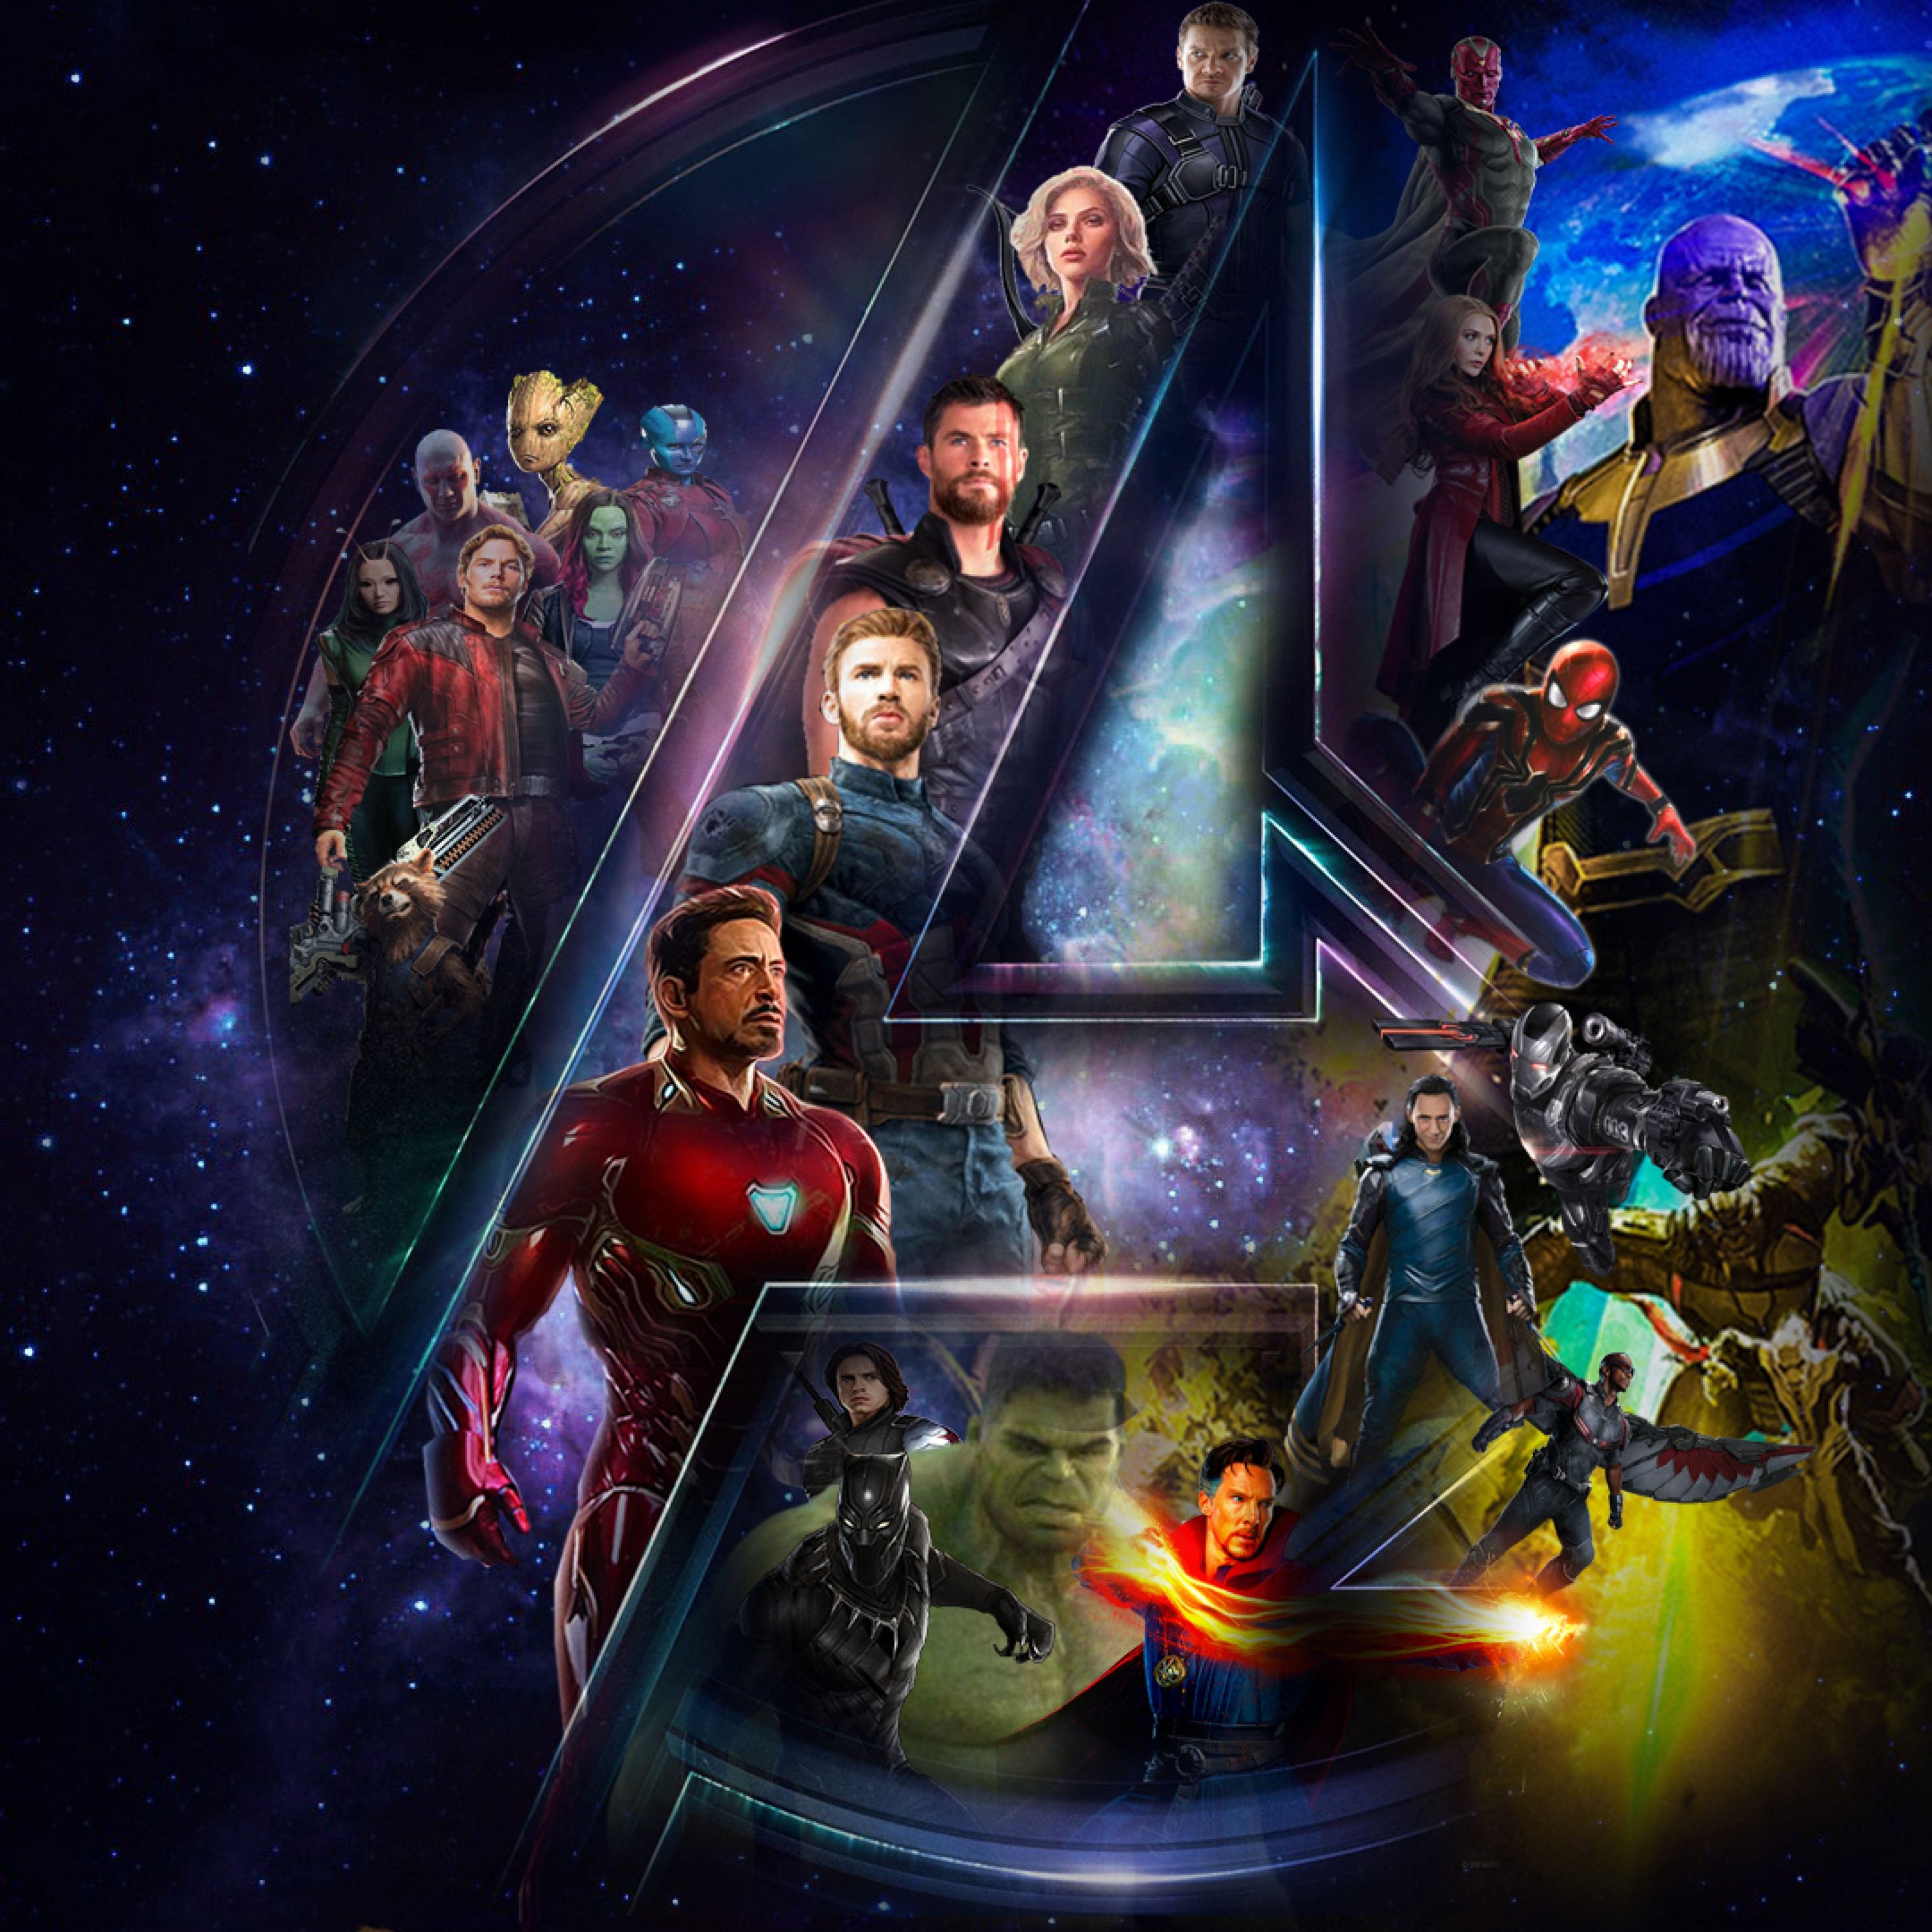 Download Avengers Infinty War Star Cast And Logo iPad Pro 12.9 inches Retina wallpaper 3415x3415